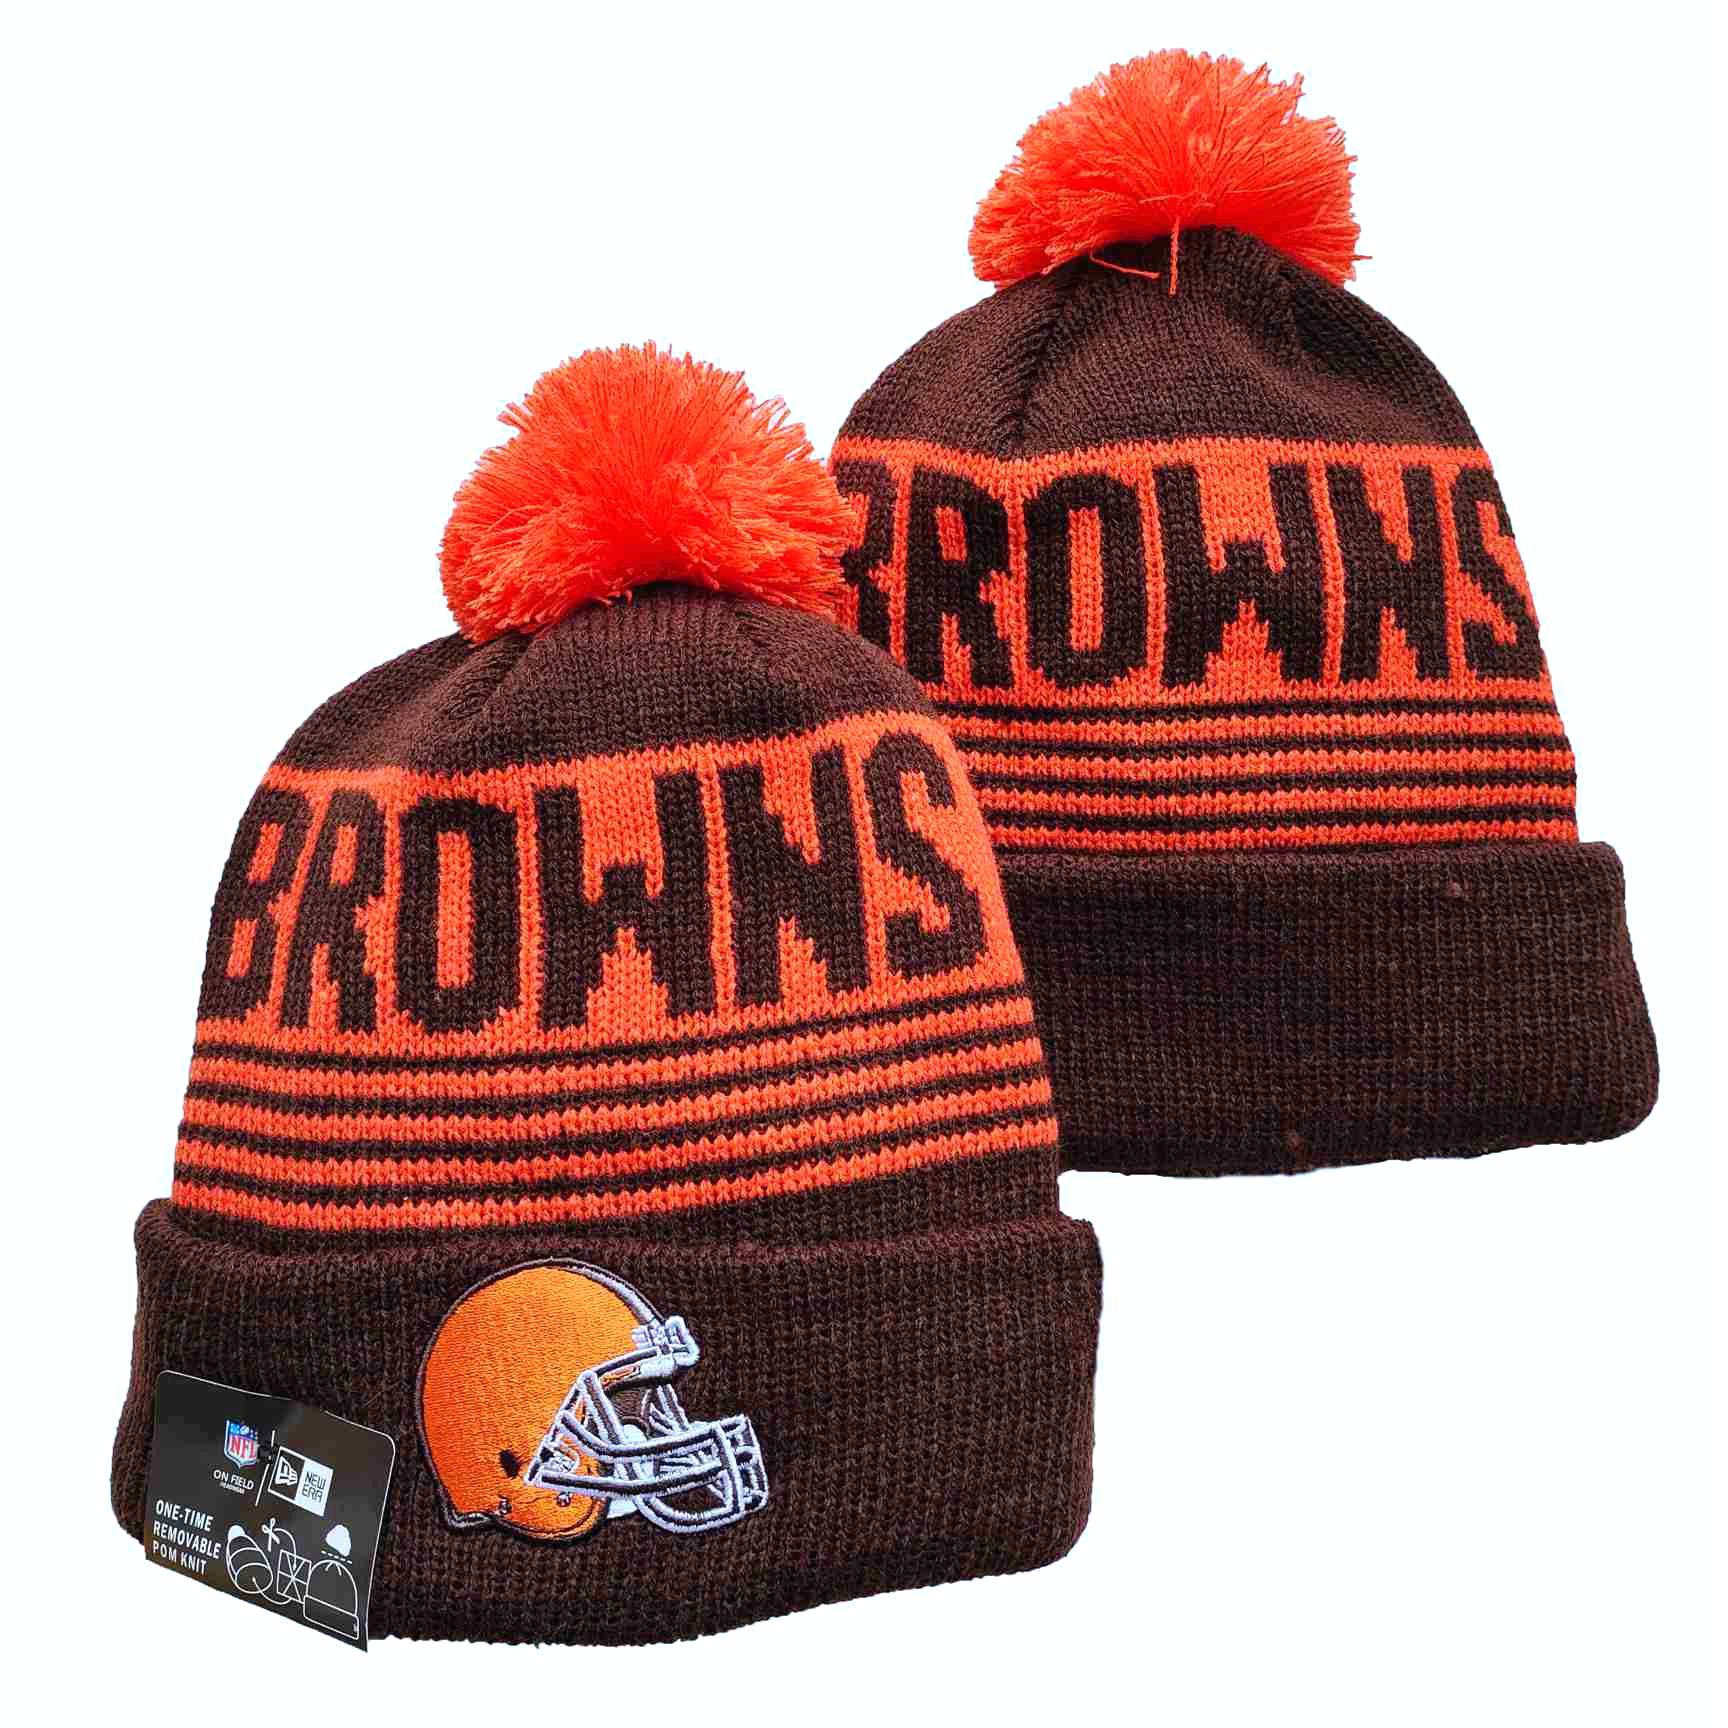 Cleveland Browns Knit Hats -15